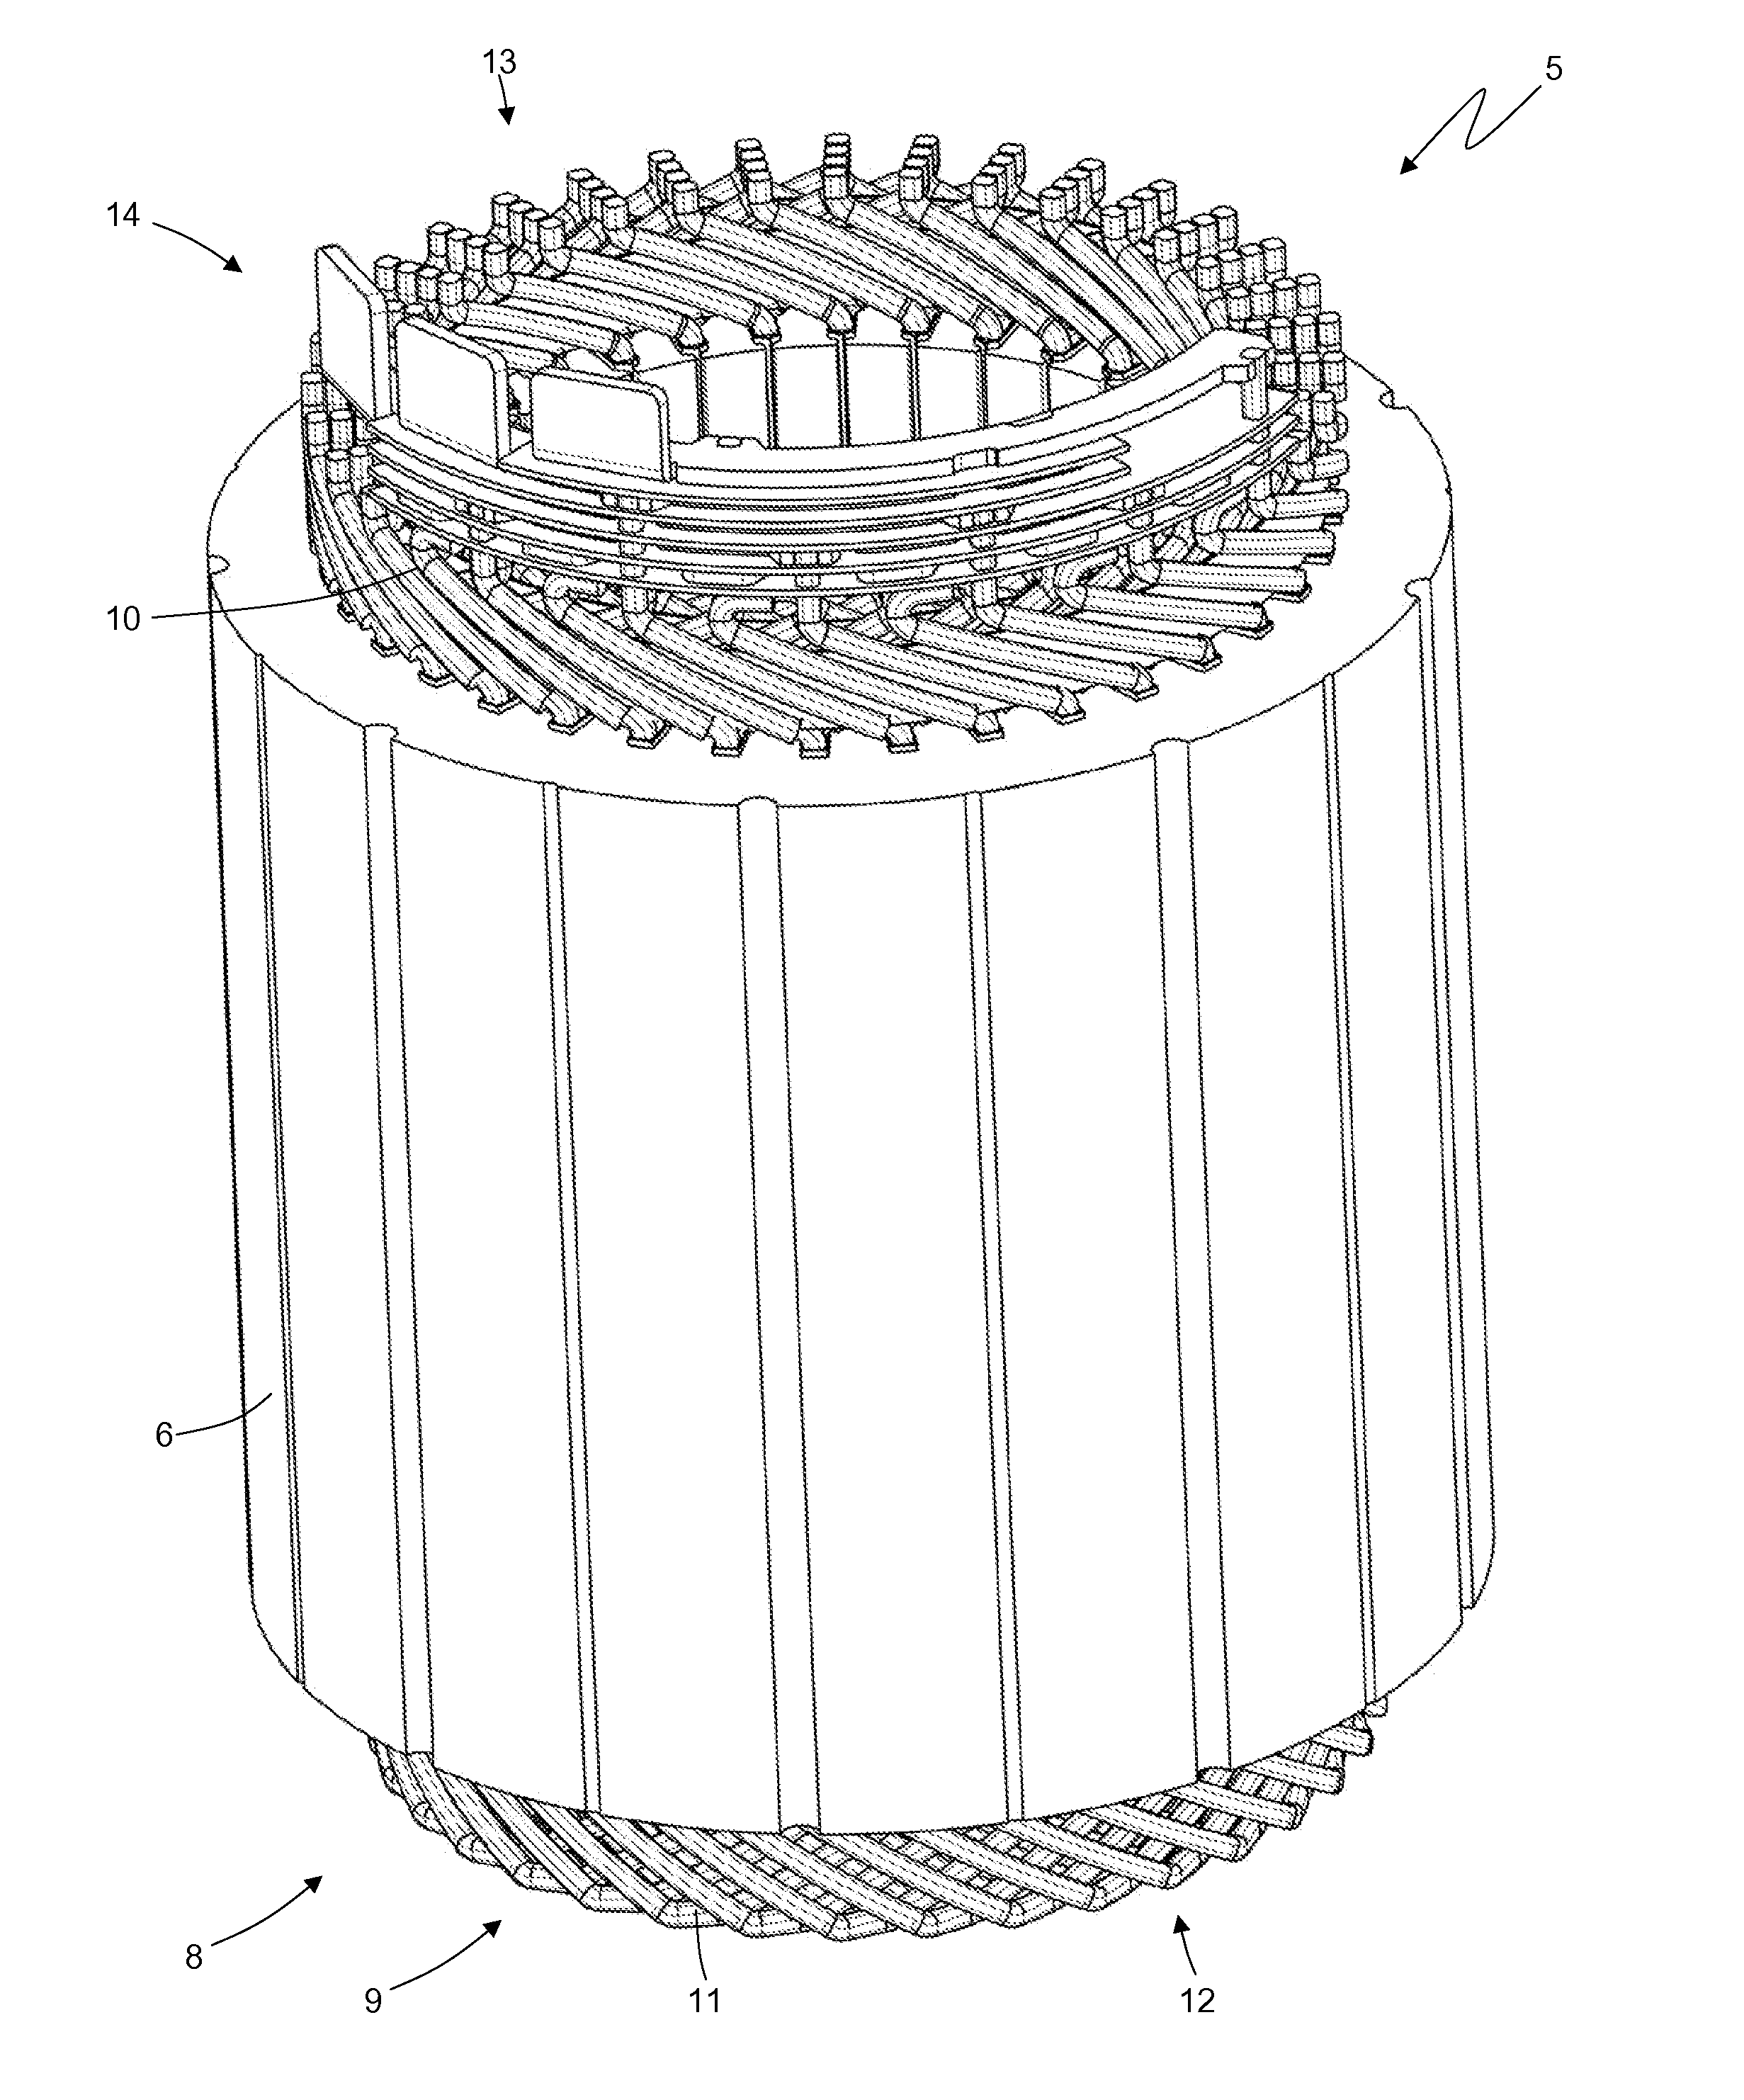 Electric machine having a stator winding with rigid bars, and related method of construction